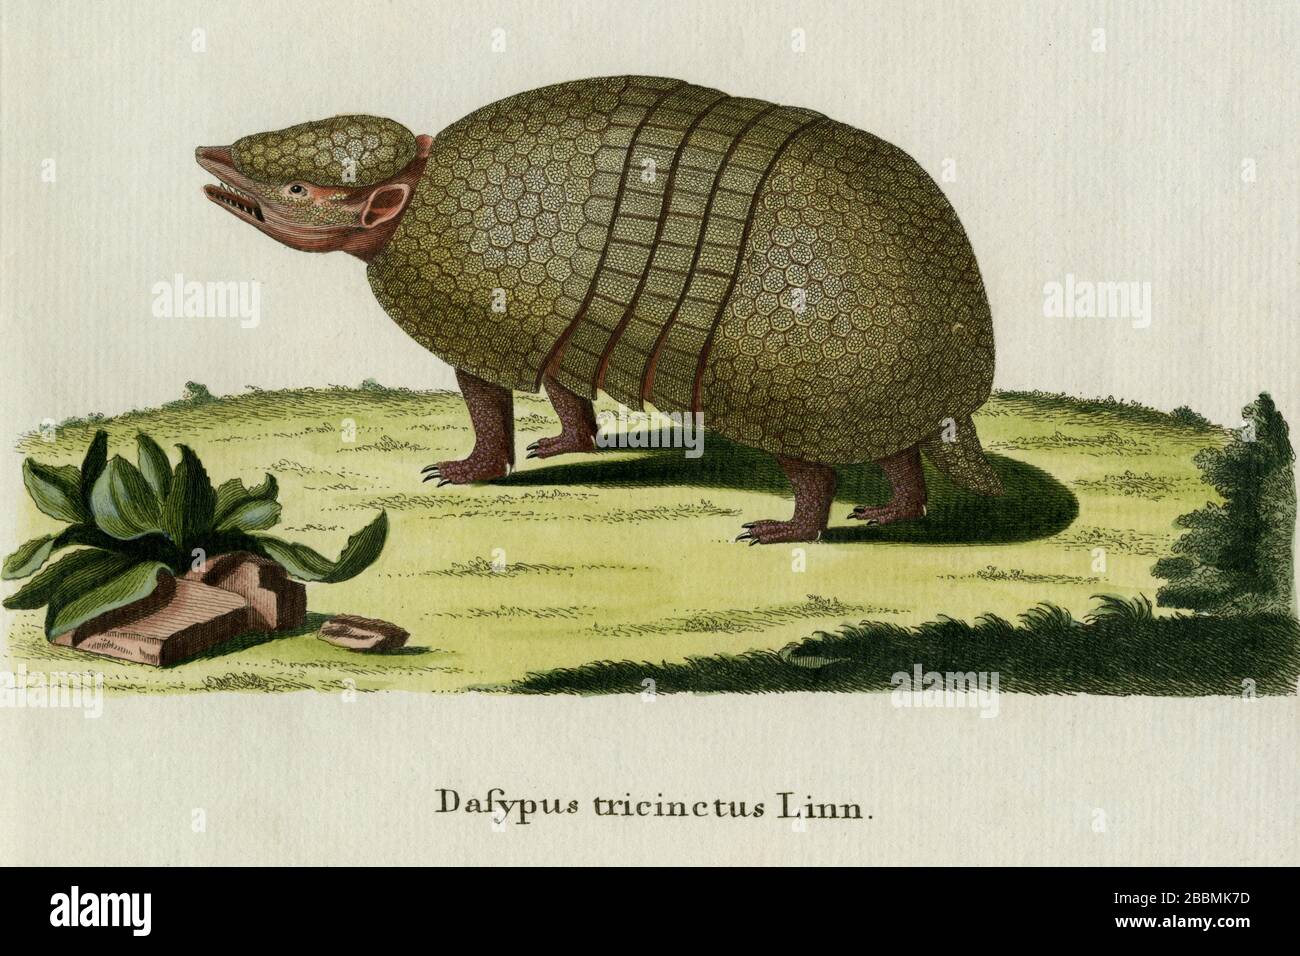 Brazilian three-banded armadillo.  Engraving created in 1700s for renowned work on mammals by German naturalist, Johann Christian Daniel von Schreber, the multi-volume 'Die Saugthiere in Abbildungen nach der Natur mit Beschreibungen' ('The Mammals in Accordance with Illustrations of Nature with Descriptions'), published from 1775 to 1792. Collectively, the mammals featured by Schreber in this work have come to be known as 'Schreber's Fantastic Beasts'.  The engraving was later coloured by hand. Stock Photo